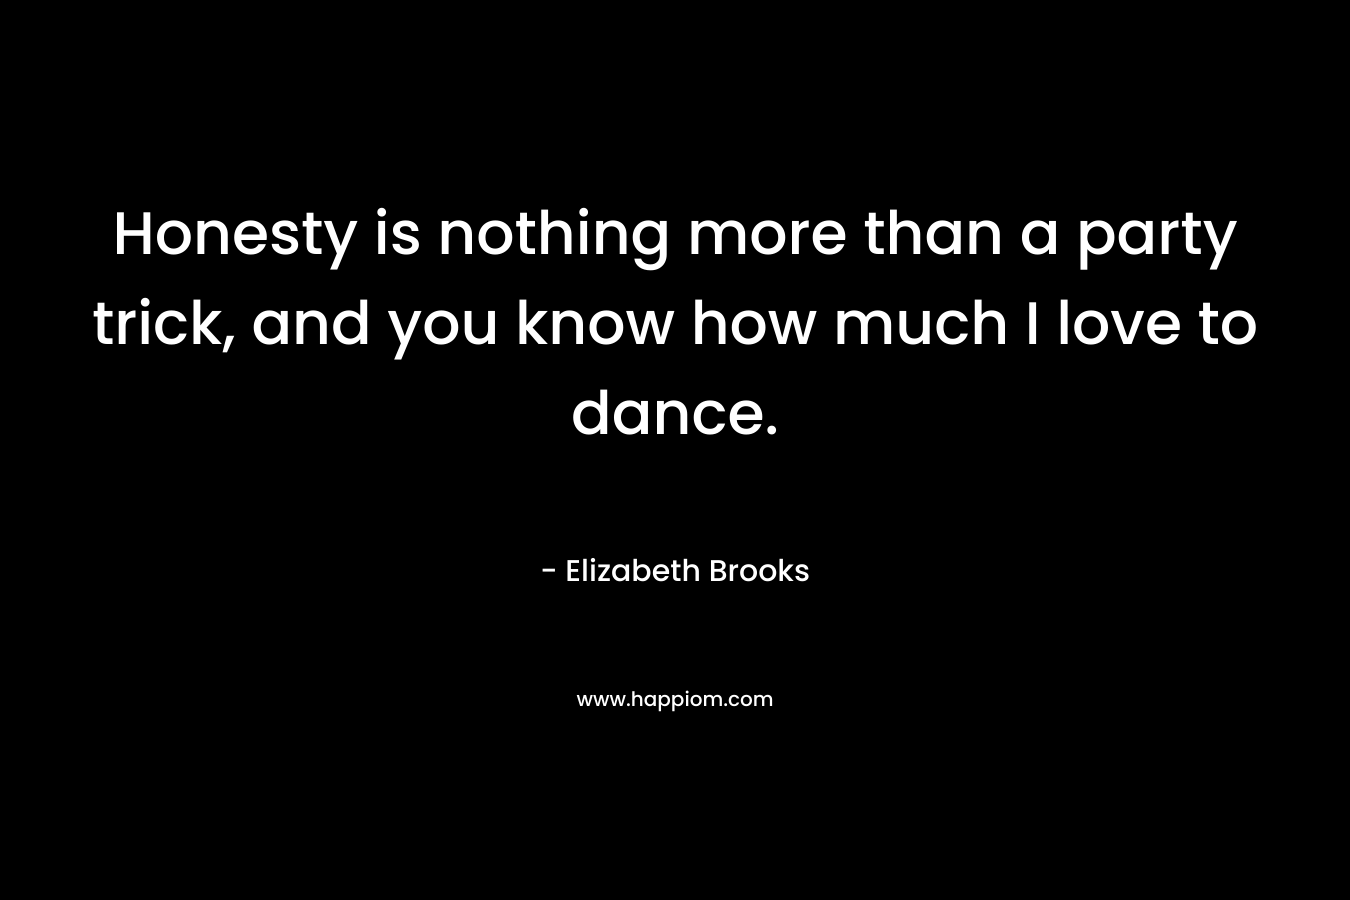 Honesty is nothing more than a party trick, and you know how much I love to dance. – Elizabeth Brooks